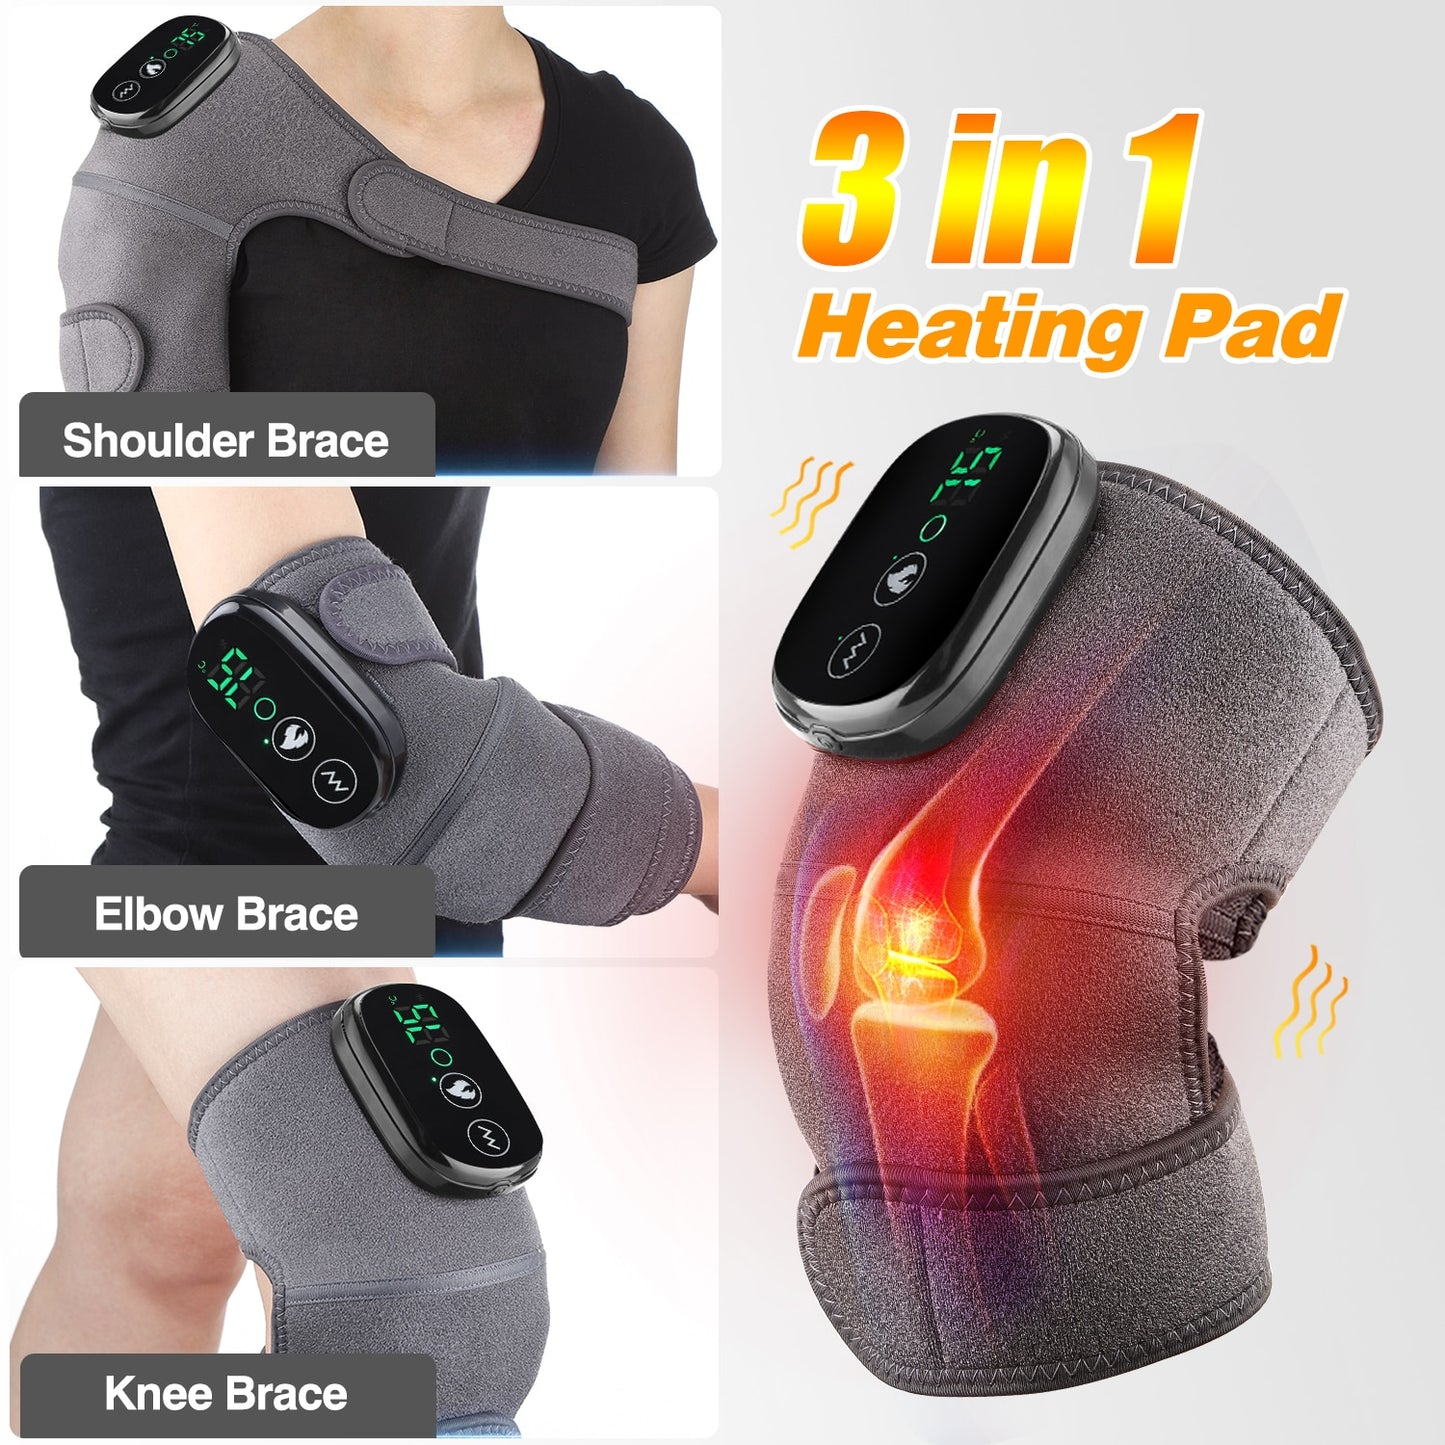 Electric Heated Knee Joint Massager: Therapy, Vibration, and Arthritis Pain Reliever